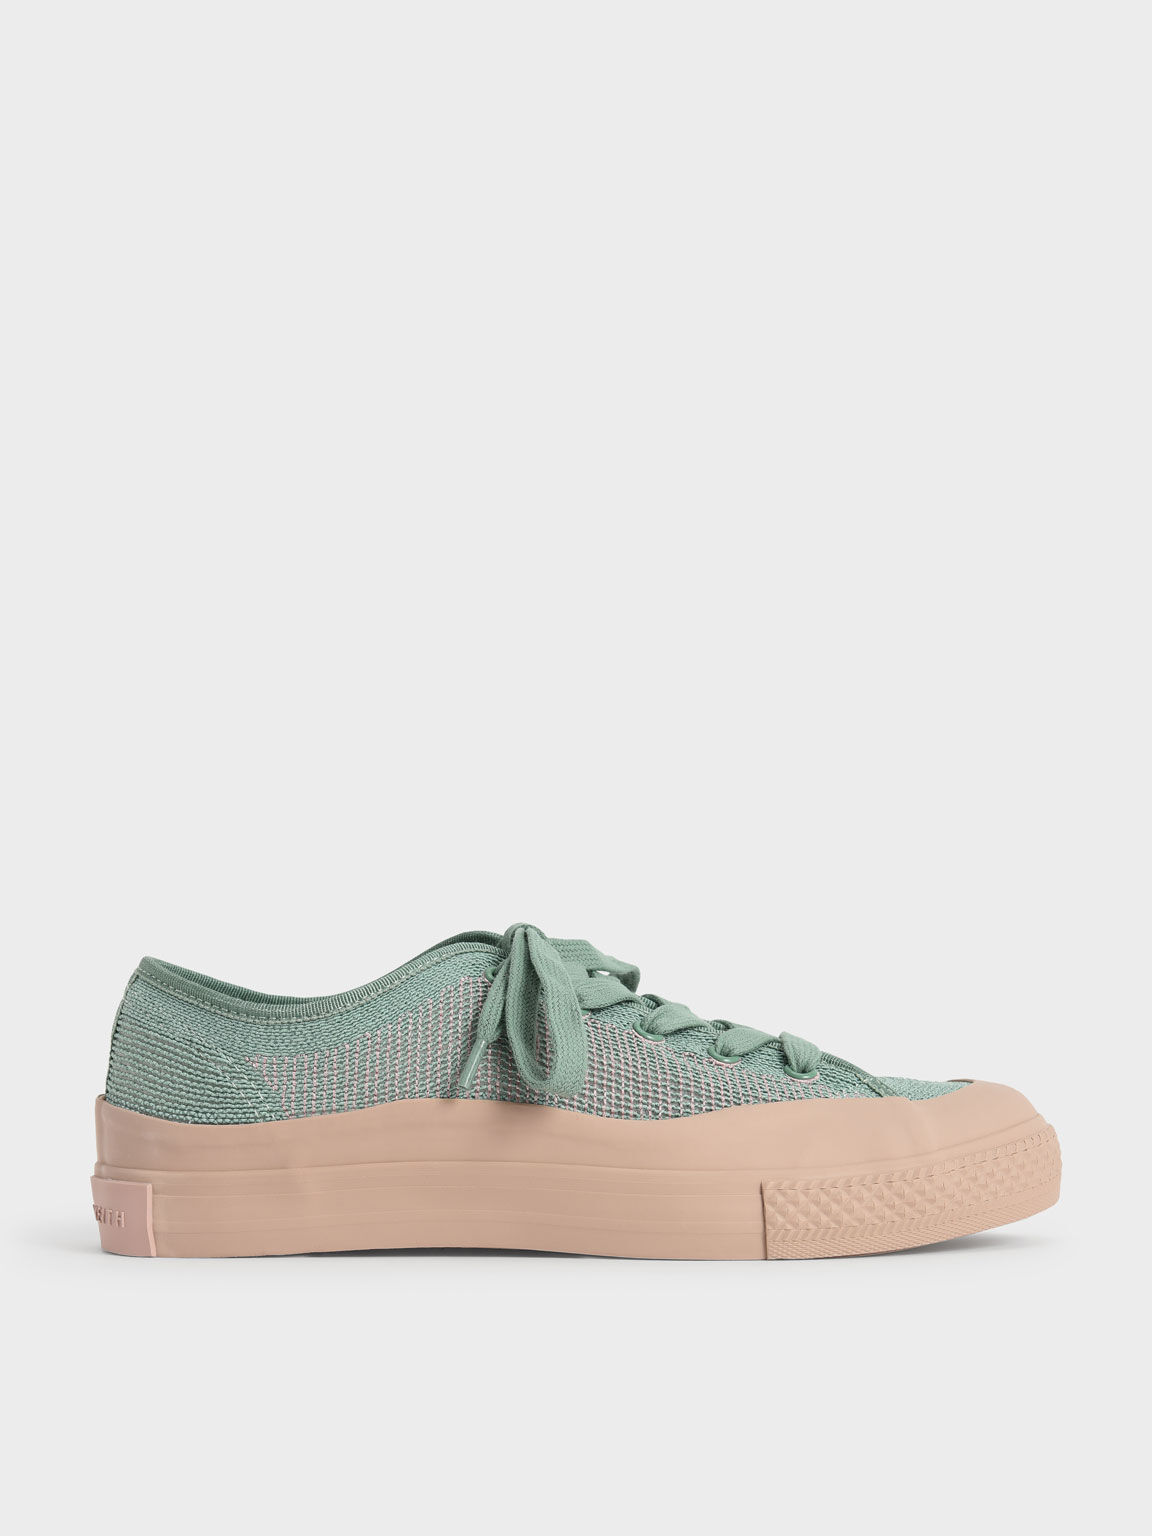 Knitted Low-Top Sneakers, Sage Green, hi-res